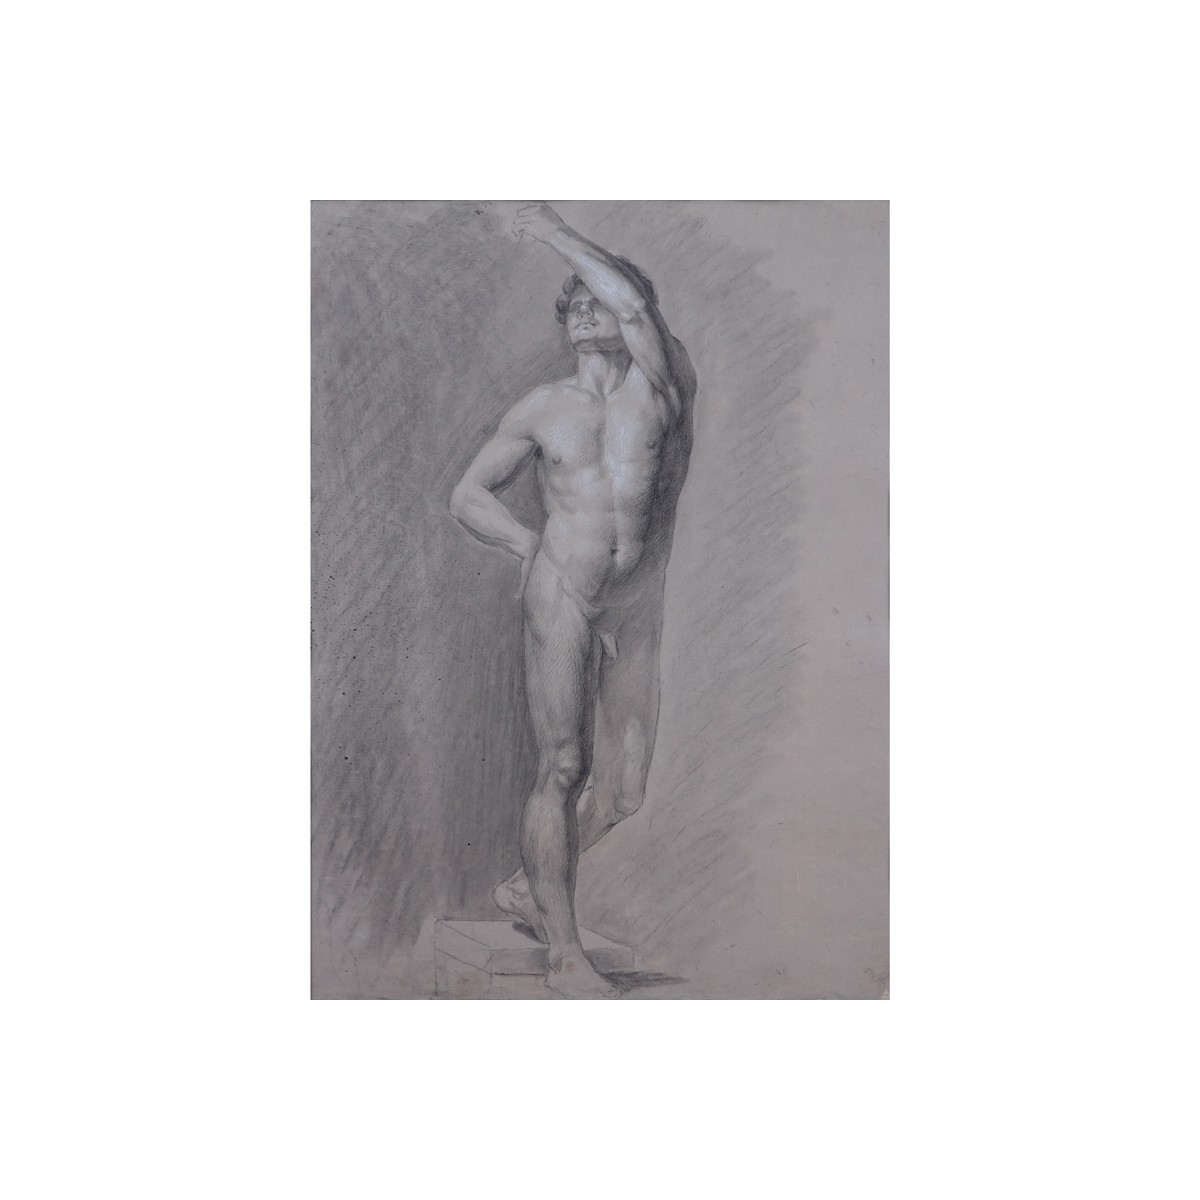 19th Century Italian Academic Graphite and Charcoal With White Highlights On Paper "Male Nude Study". Unsigned.